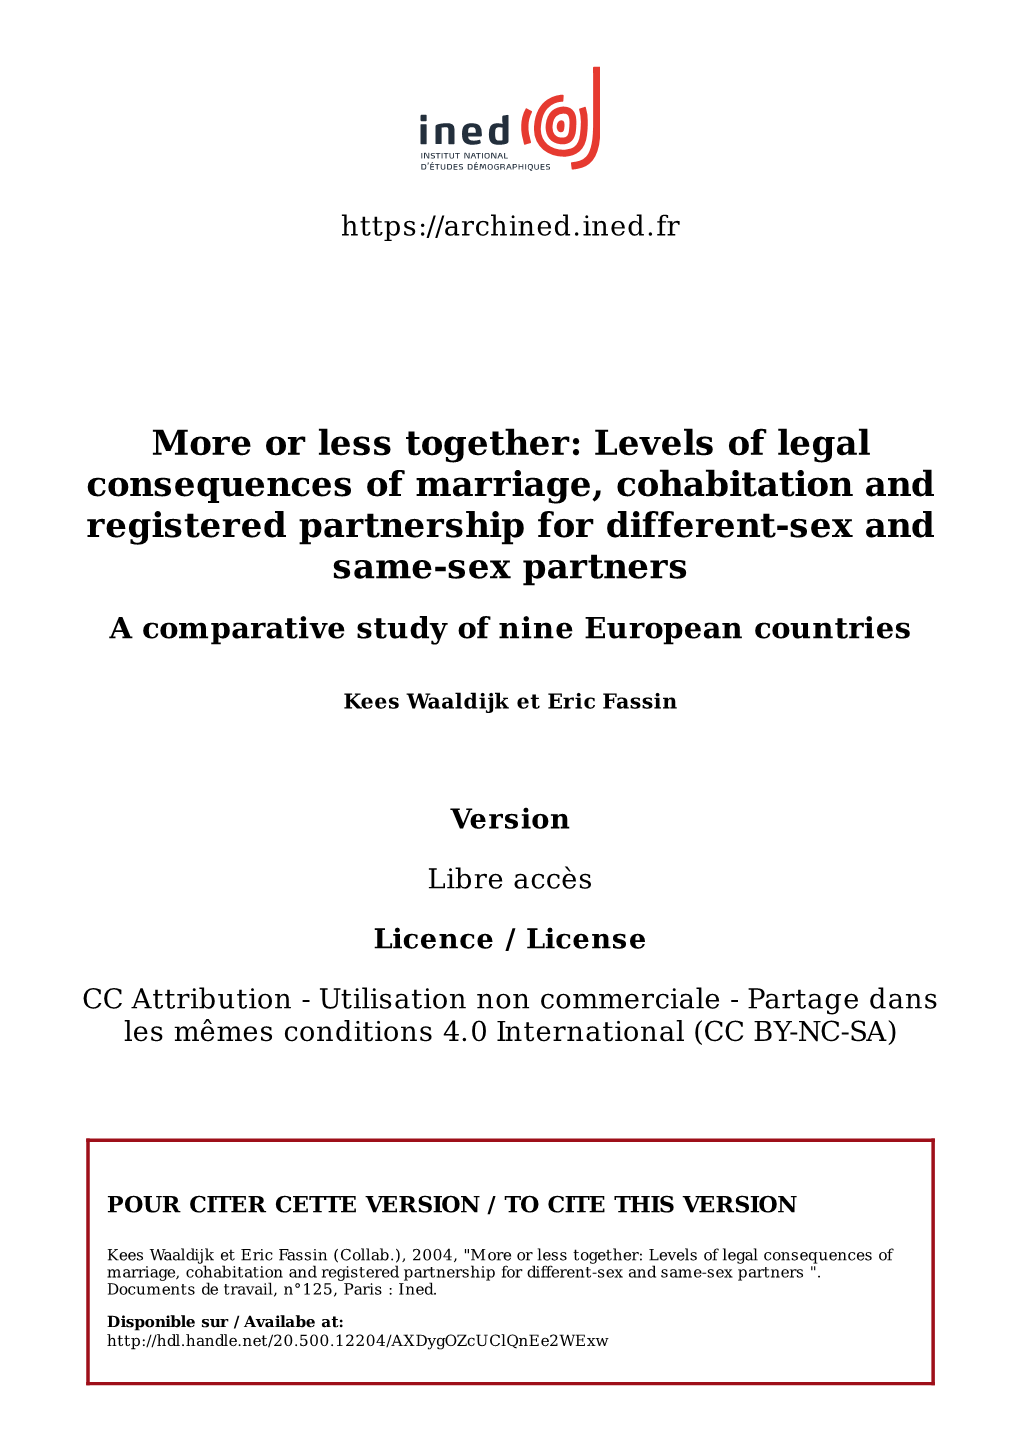 Levels of Legal Consequences of Marriage, Cohabitation and Registered Partnership for Different-Sex and Same-Sex Partners